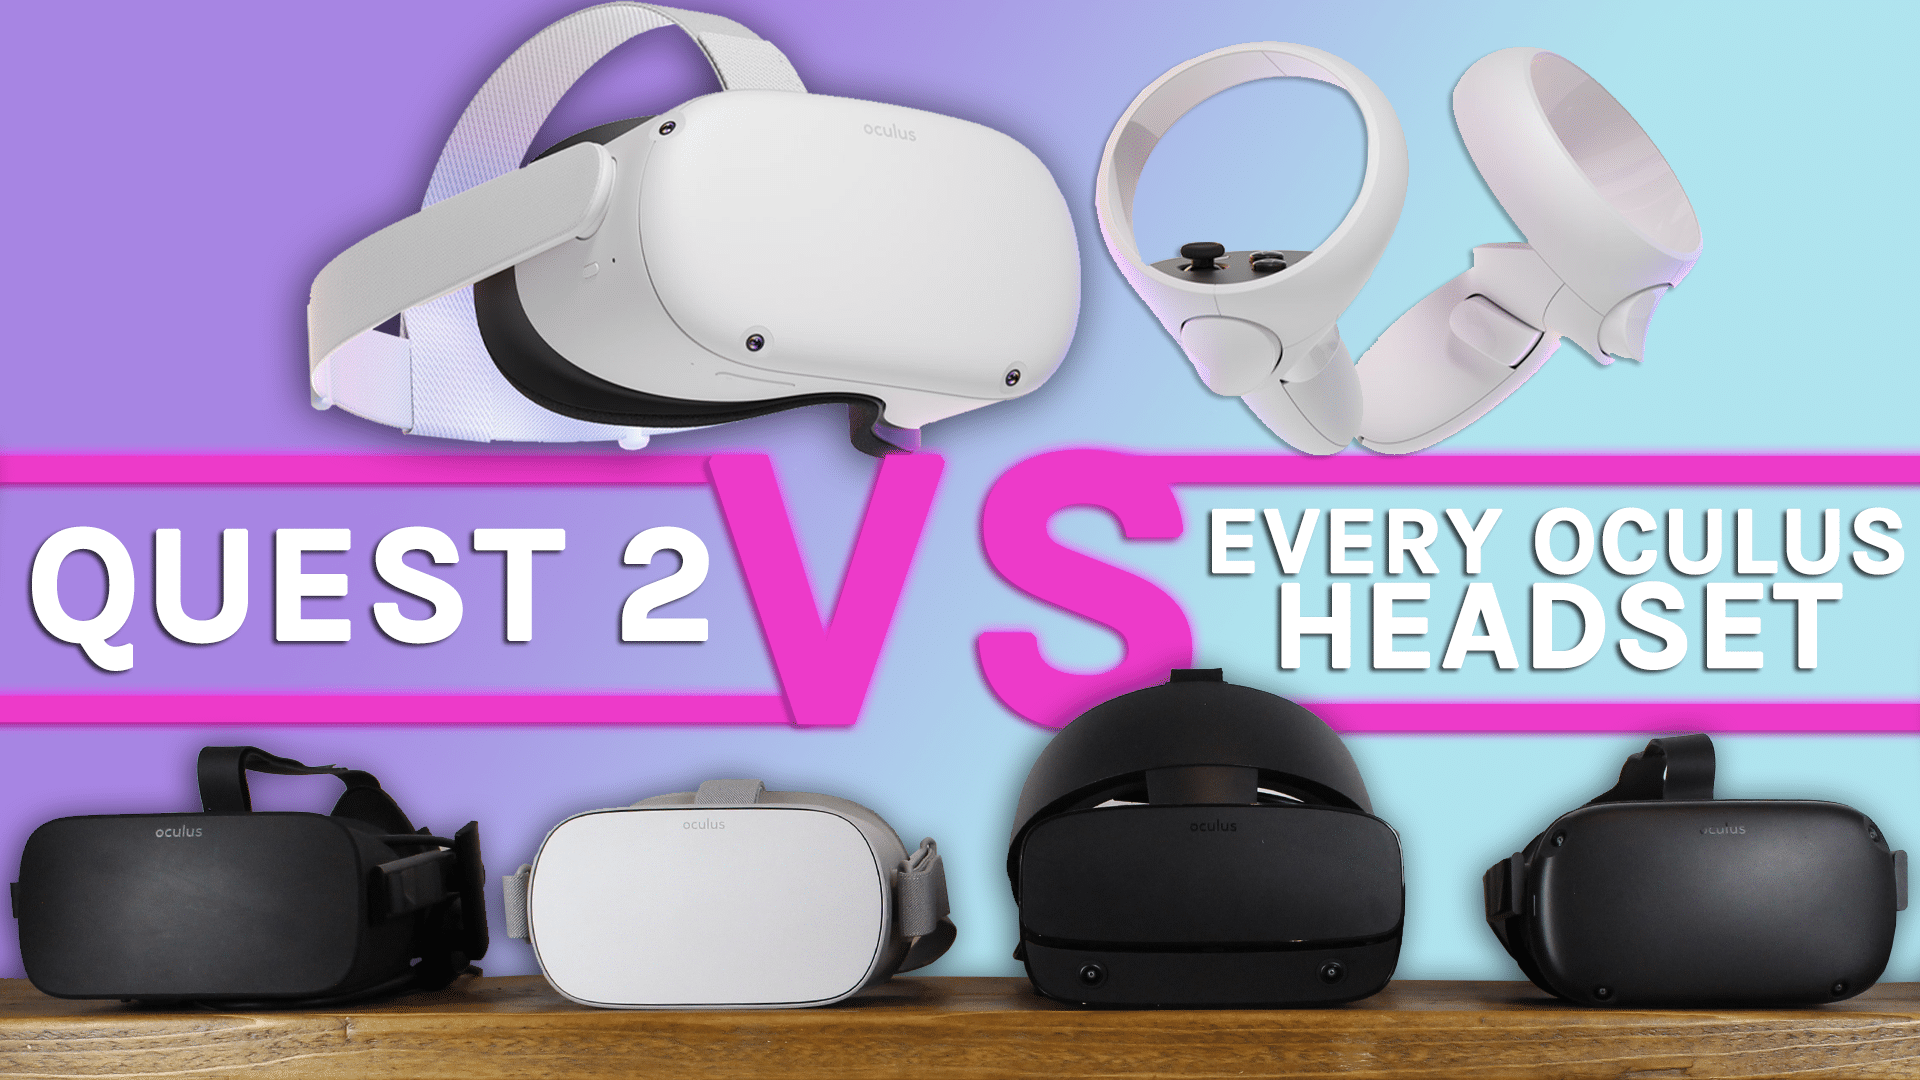 Quest 2 Every Oculus Headset